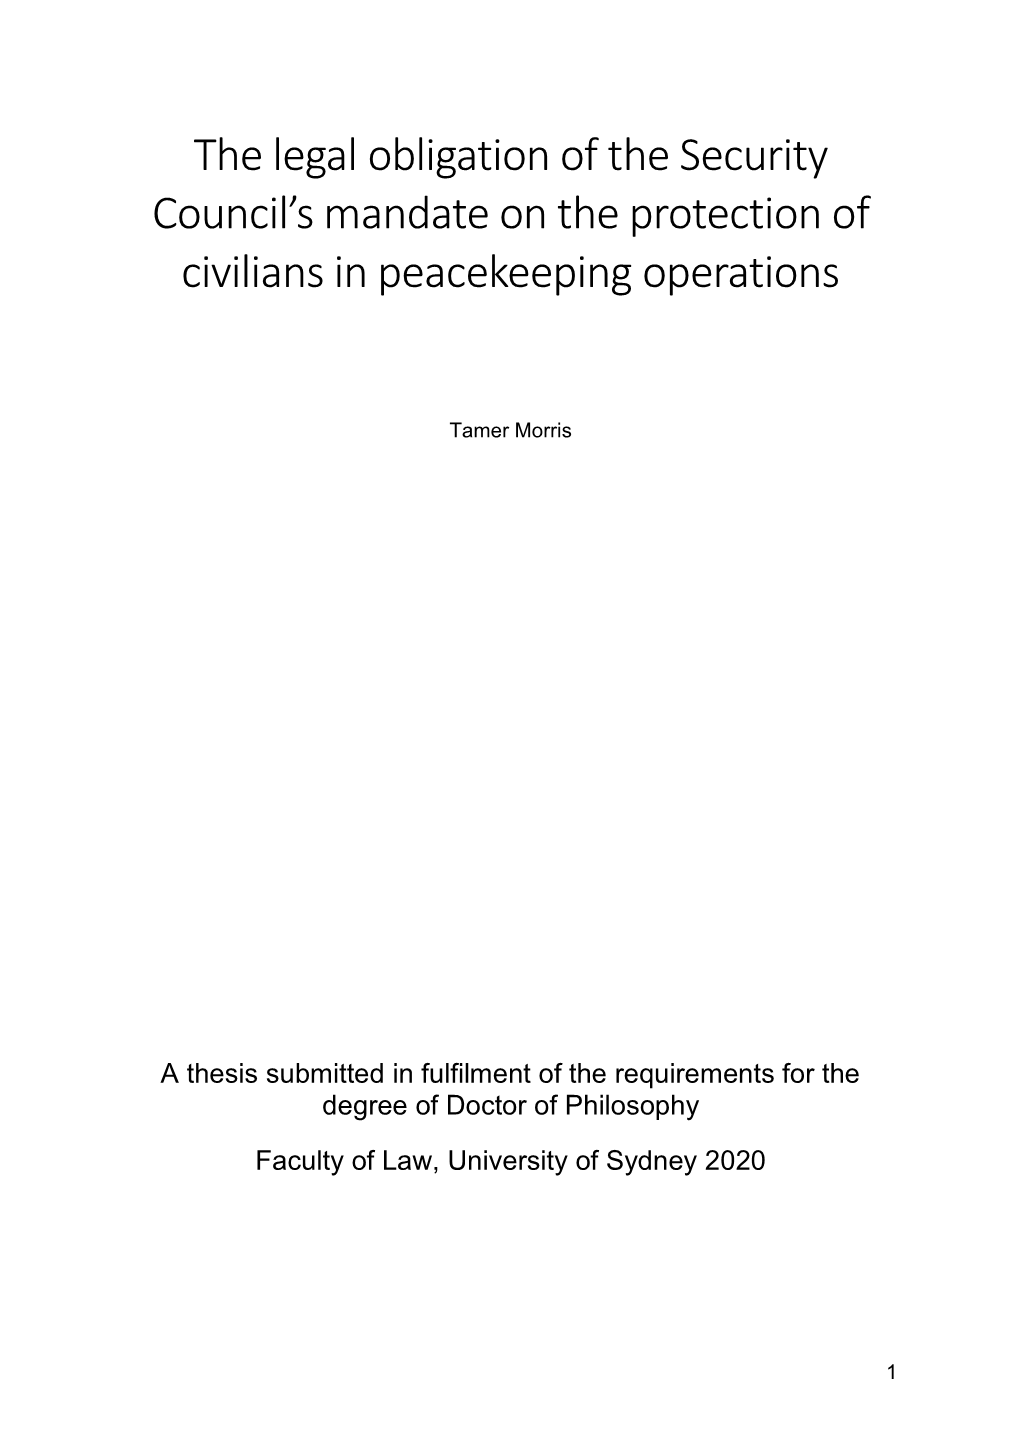 The Legal Obligation of the Security Council's Mandate on the Protection of Civilians in Peacekeeping Operations